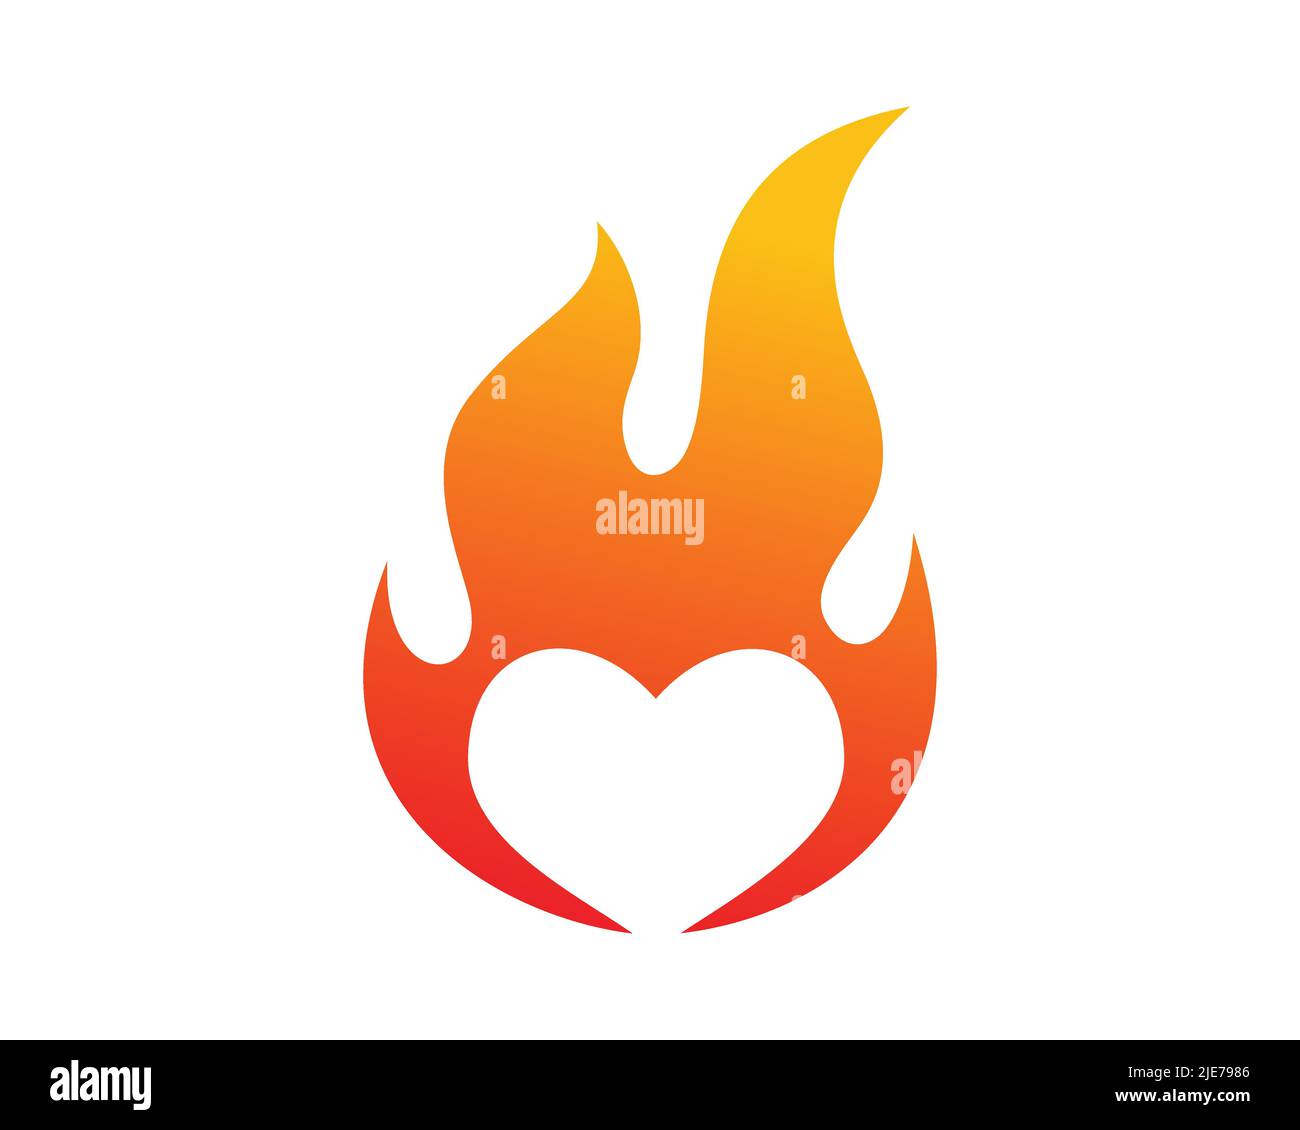 Simple and Creative Burning Love Symbol Stock Vector